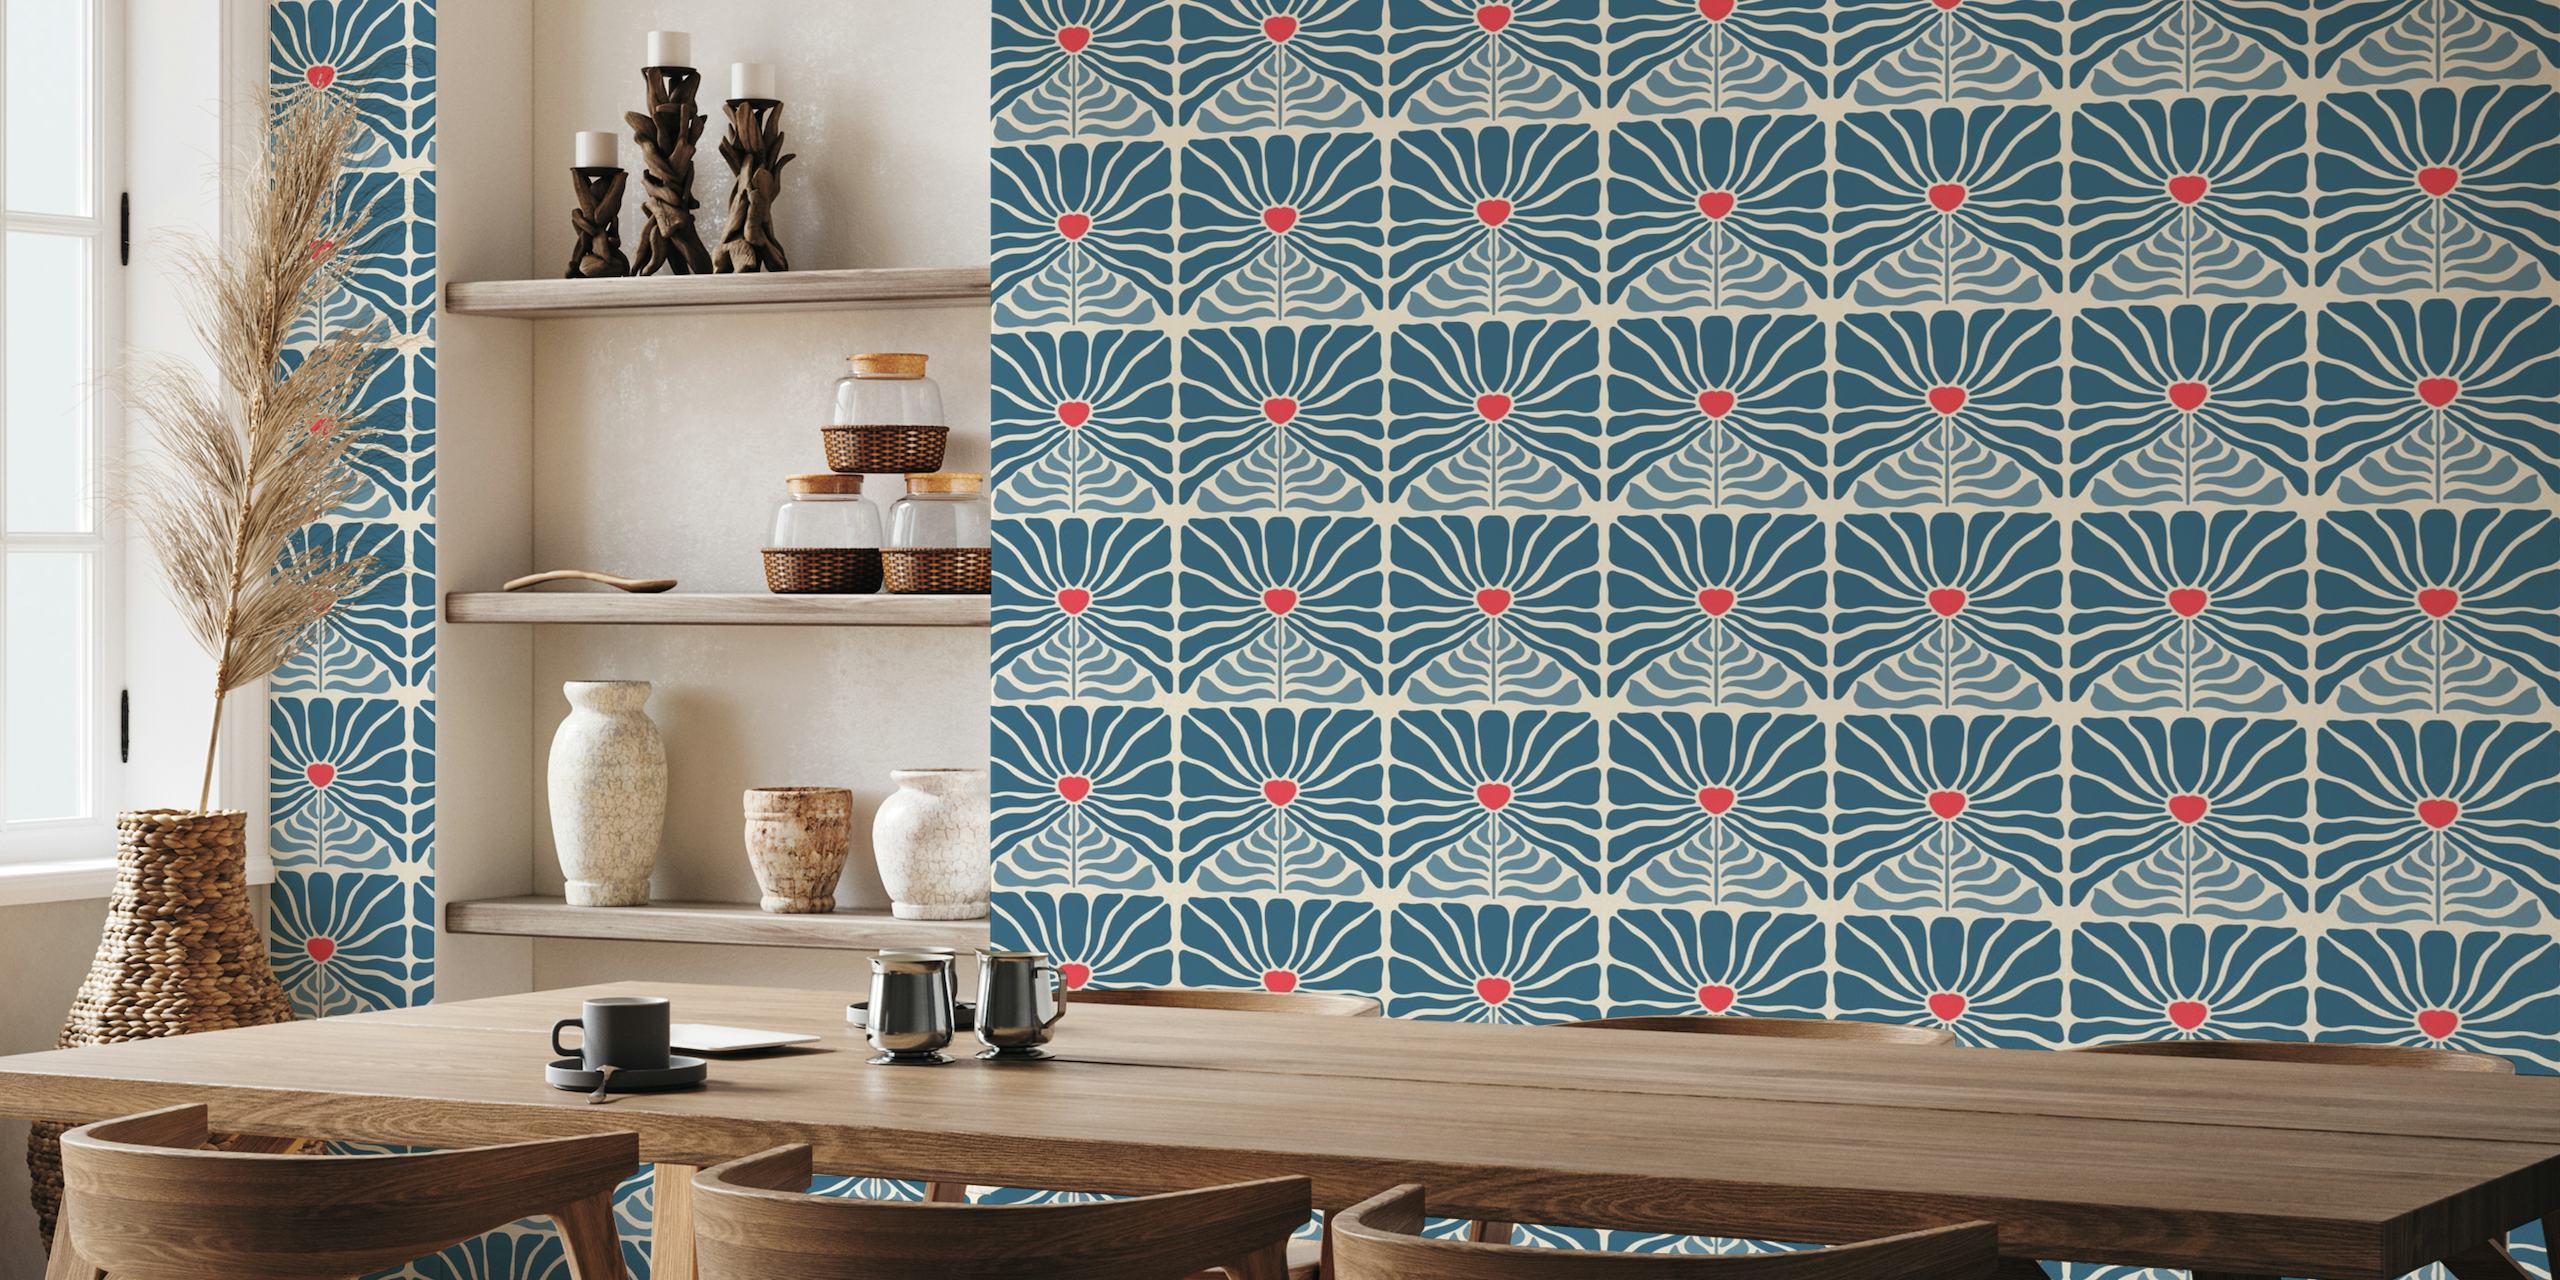 Blue and red vintage floral pattern wall mural